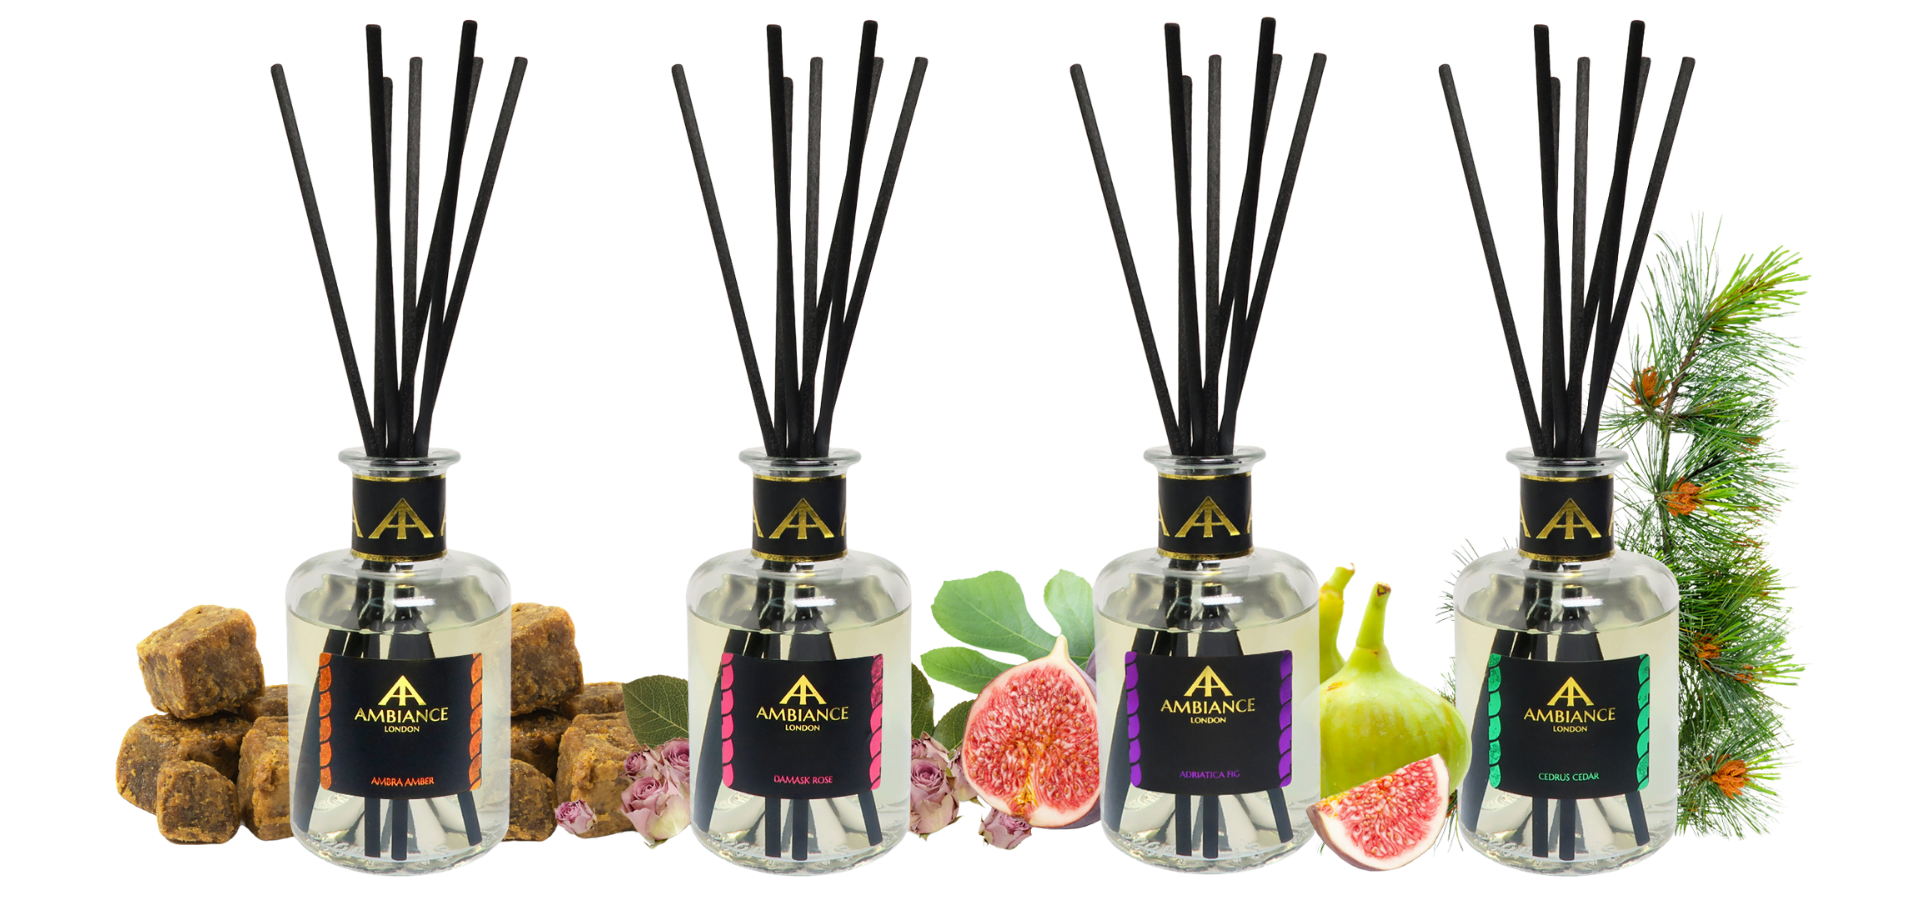 home fragrance diffusers - ancienne ambiance - luxury scents for the home